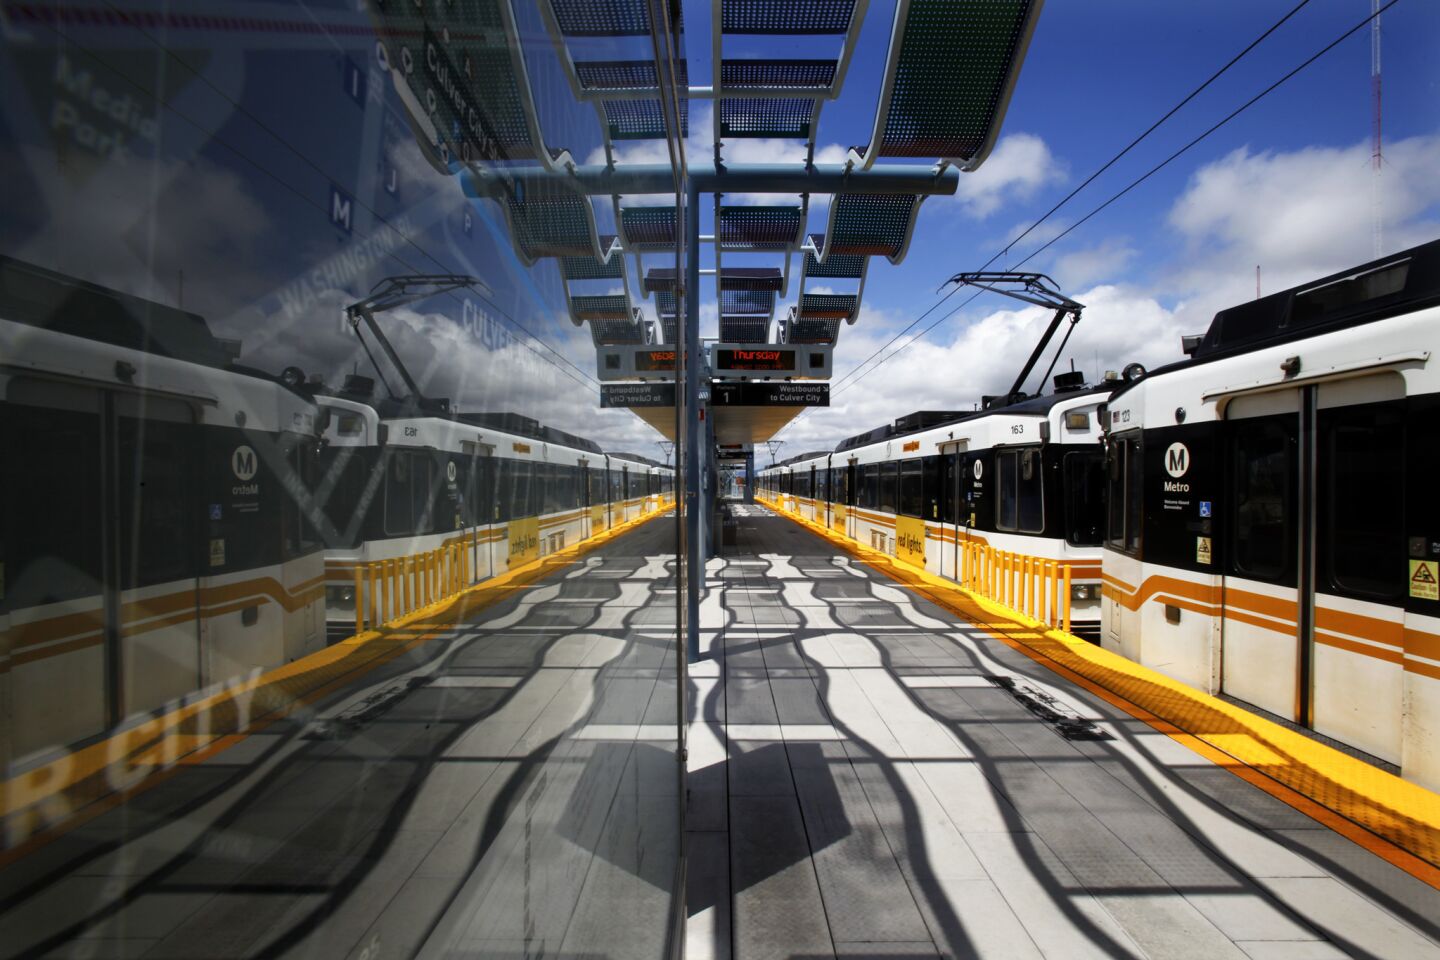 Arts and culture in pictures by The Times | Expo Line opens